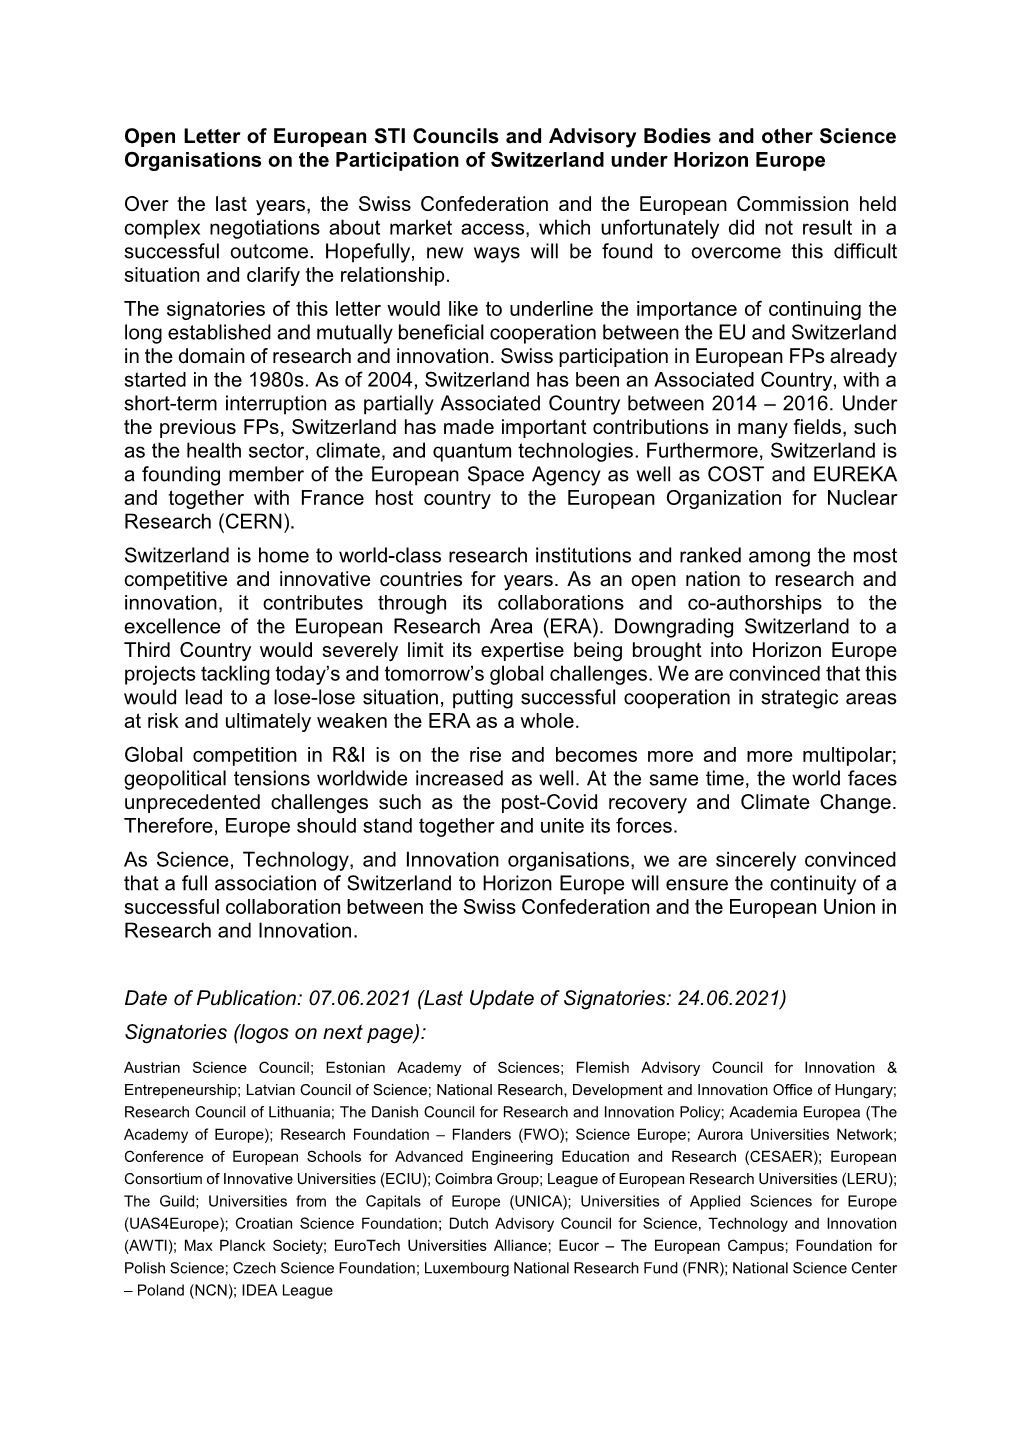 Open Letter of European STI Councils and Advisory Bodies and Other Science Organisations on the Participation of Switzerland Under Horizon Europe